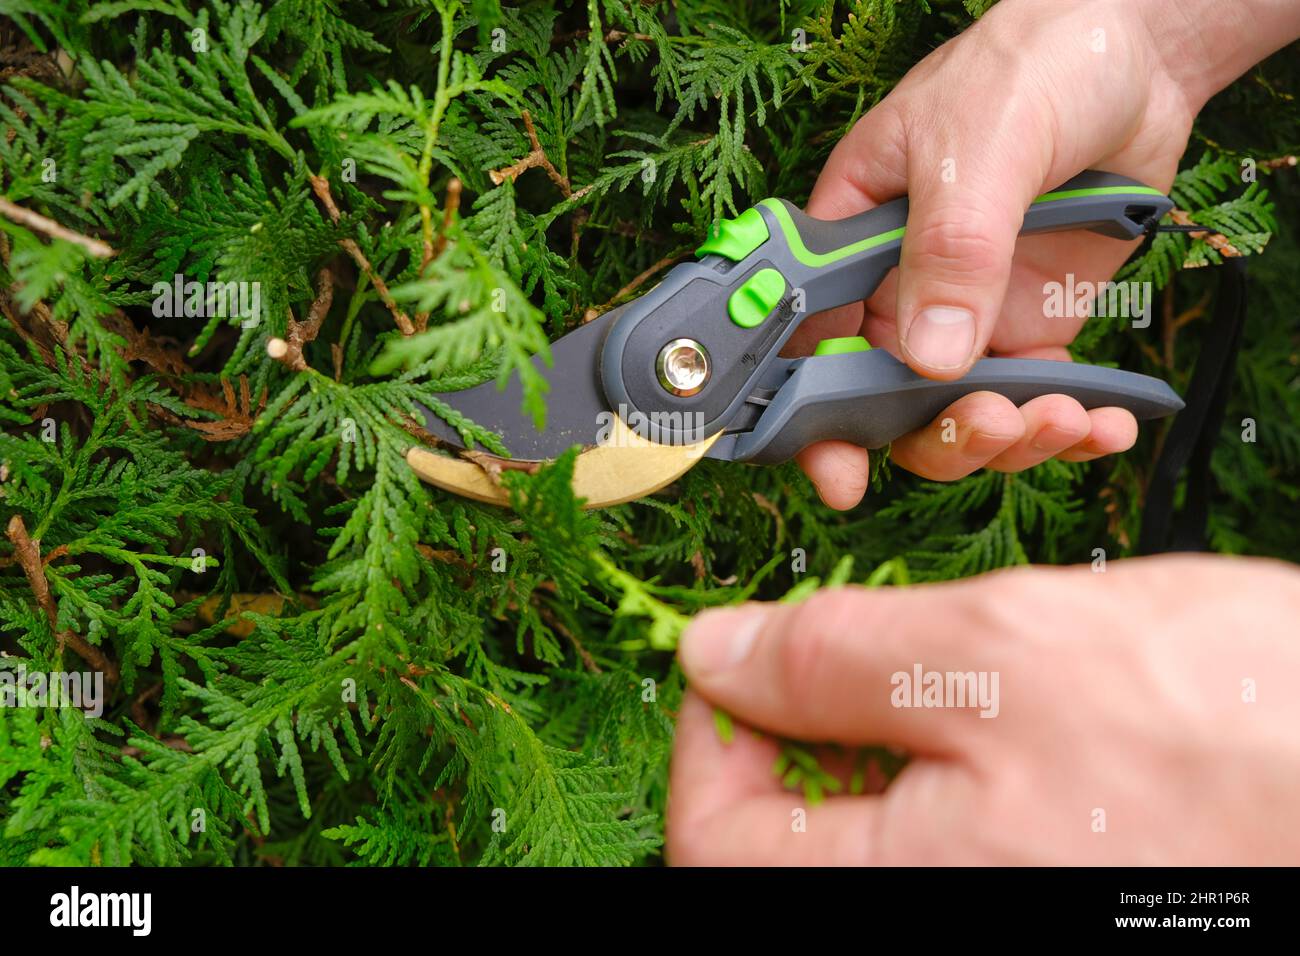 Pruning thuja.Garden Plants Pruning Tool. Garden shears in hands close-up cutting a hedge.Plant pruning..Gardening and farming tools Stock Photo